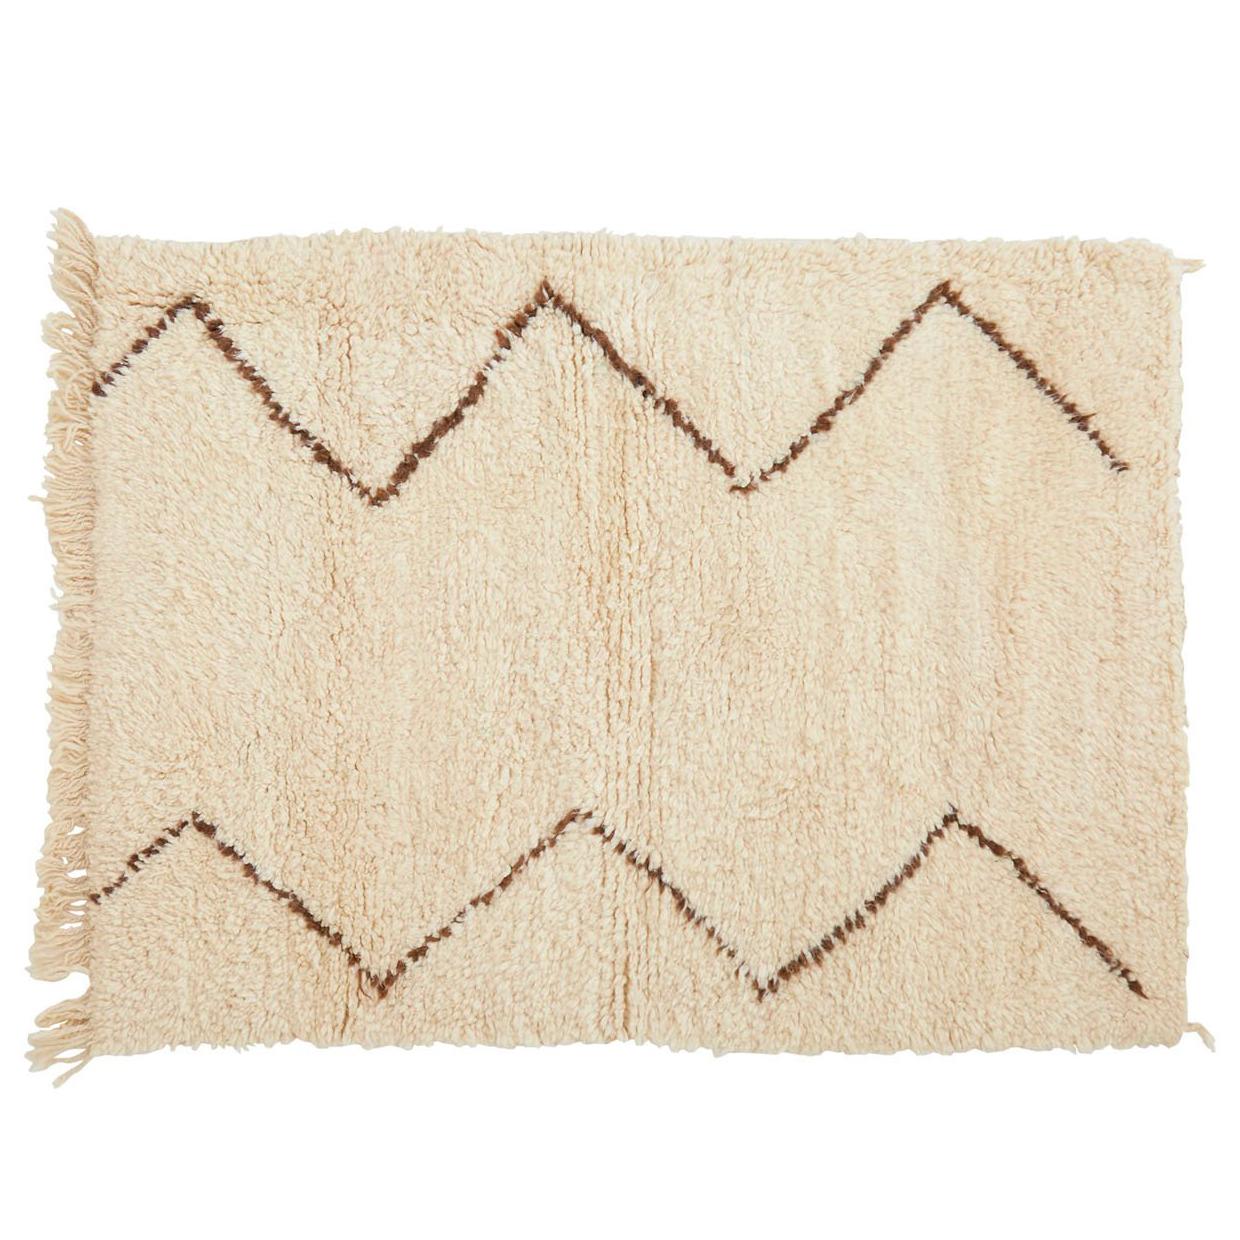 Crème and Brown Beni Ourain Rug